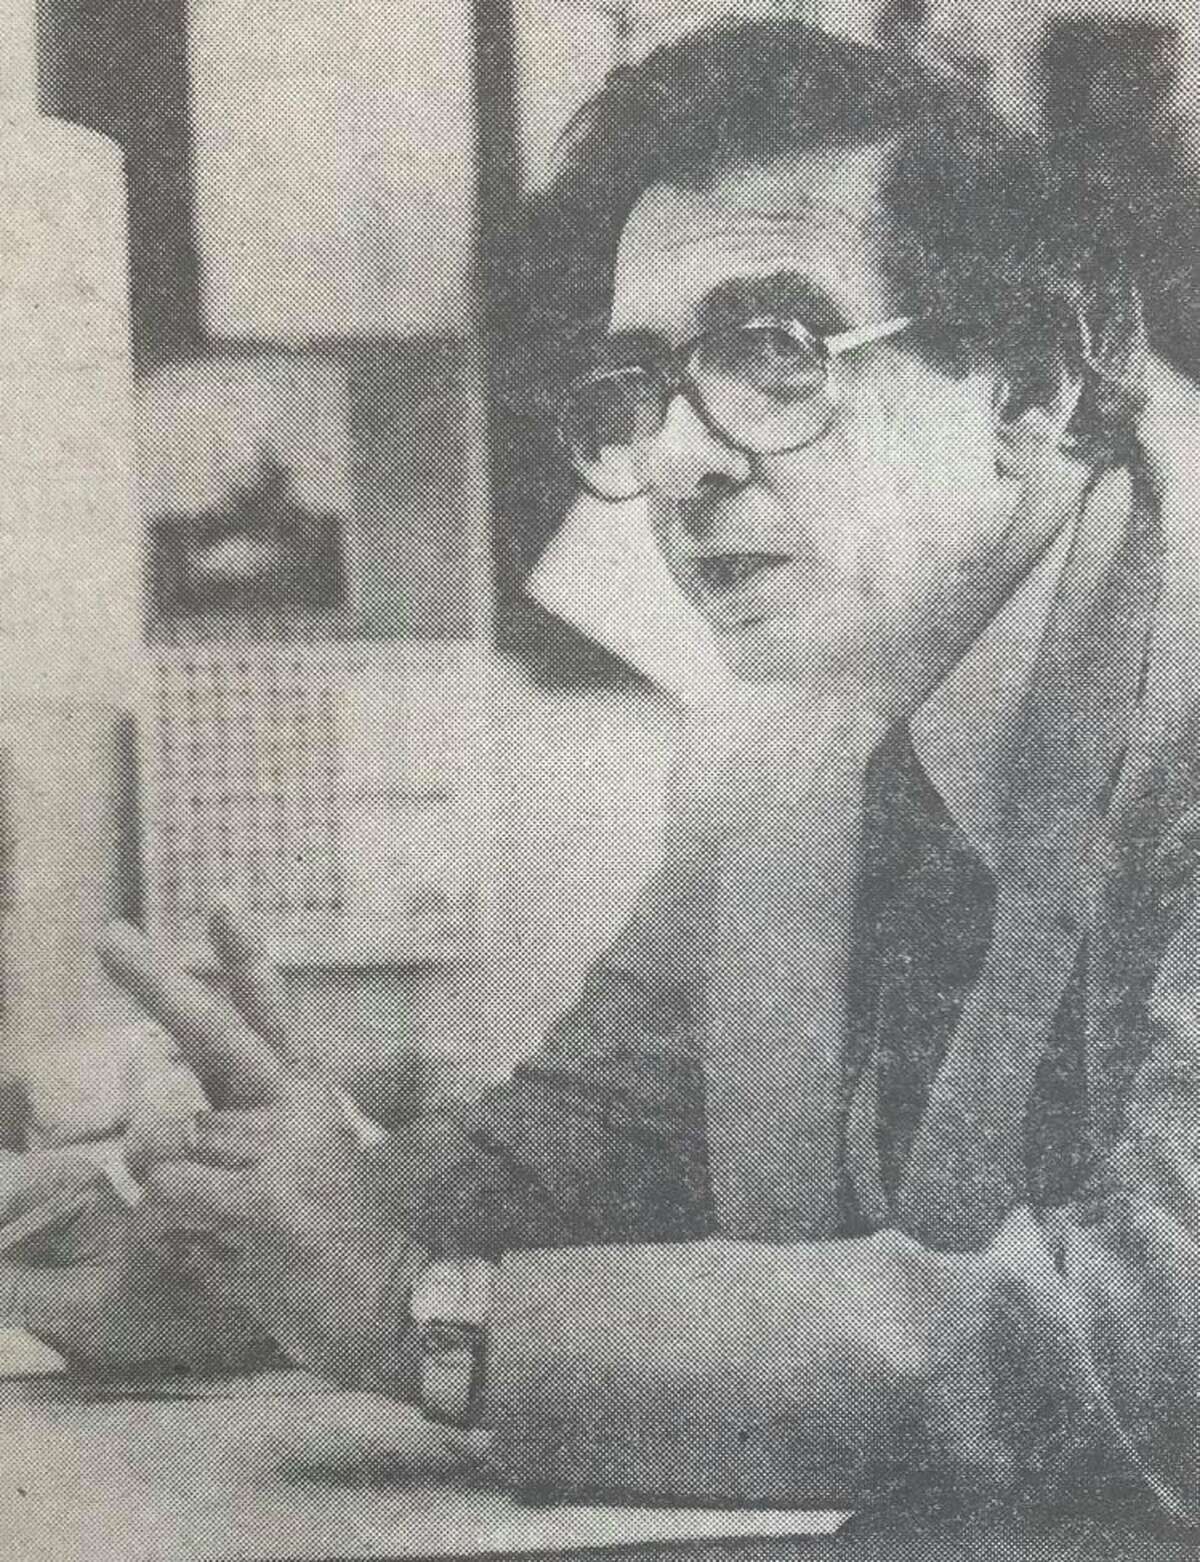 Principal Frank Perry in his office at Longview Elementary. November 1979